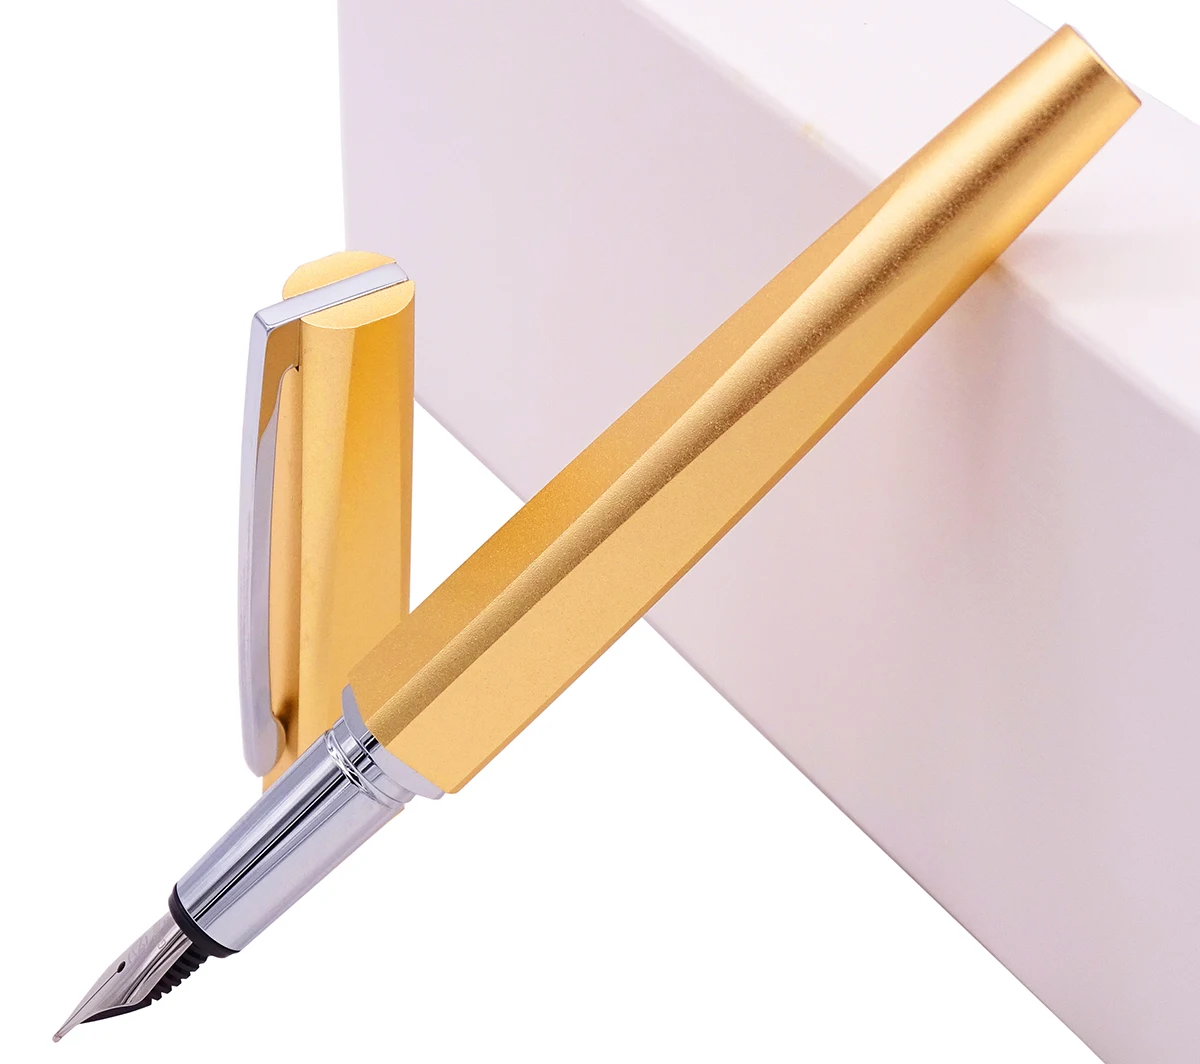 KACO SQUARE Luxury Aluminum Four Sides Gold Fountain Pen with Iron Box, Schmidt Converter & Fine Nib 0.5mm Gift Set for Office